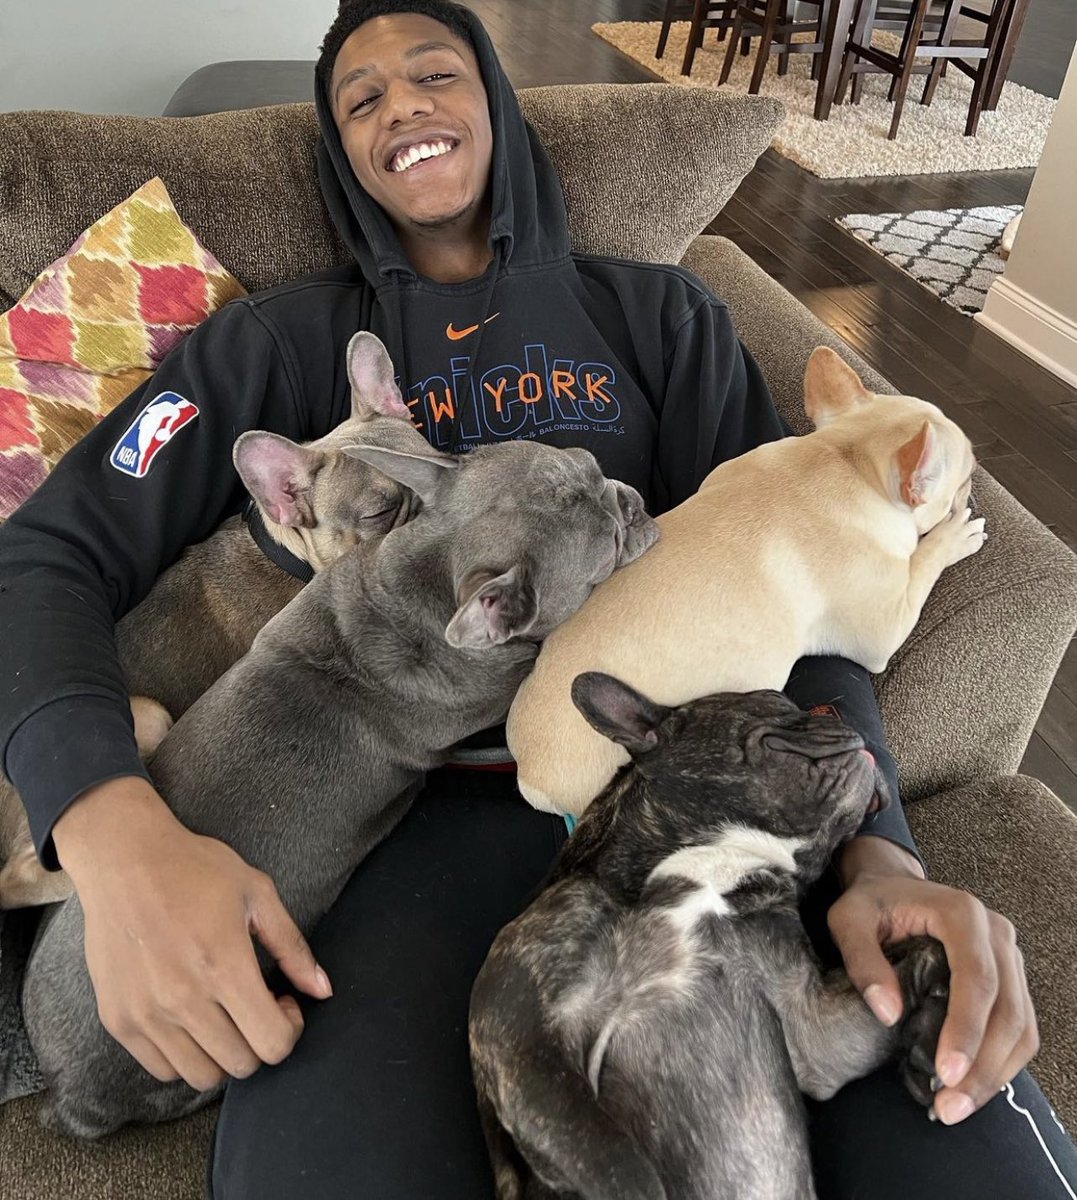 wholesome pic of my unproblematic 2019 draft pick